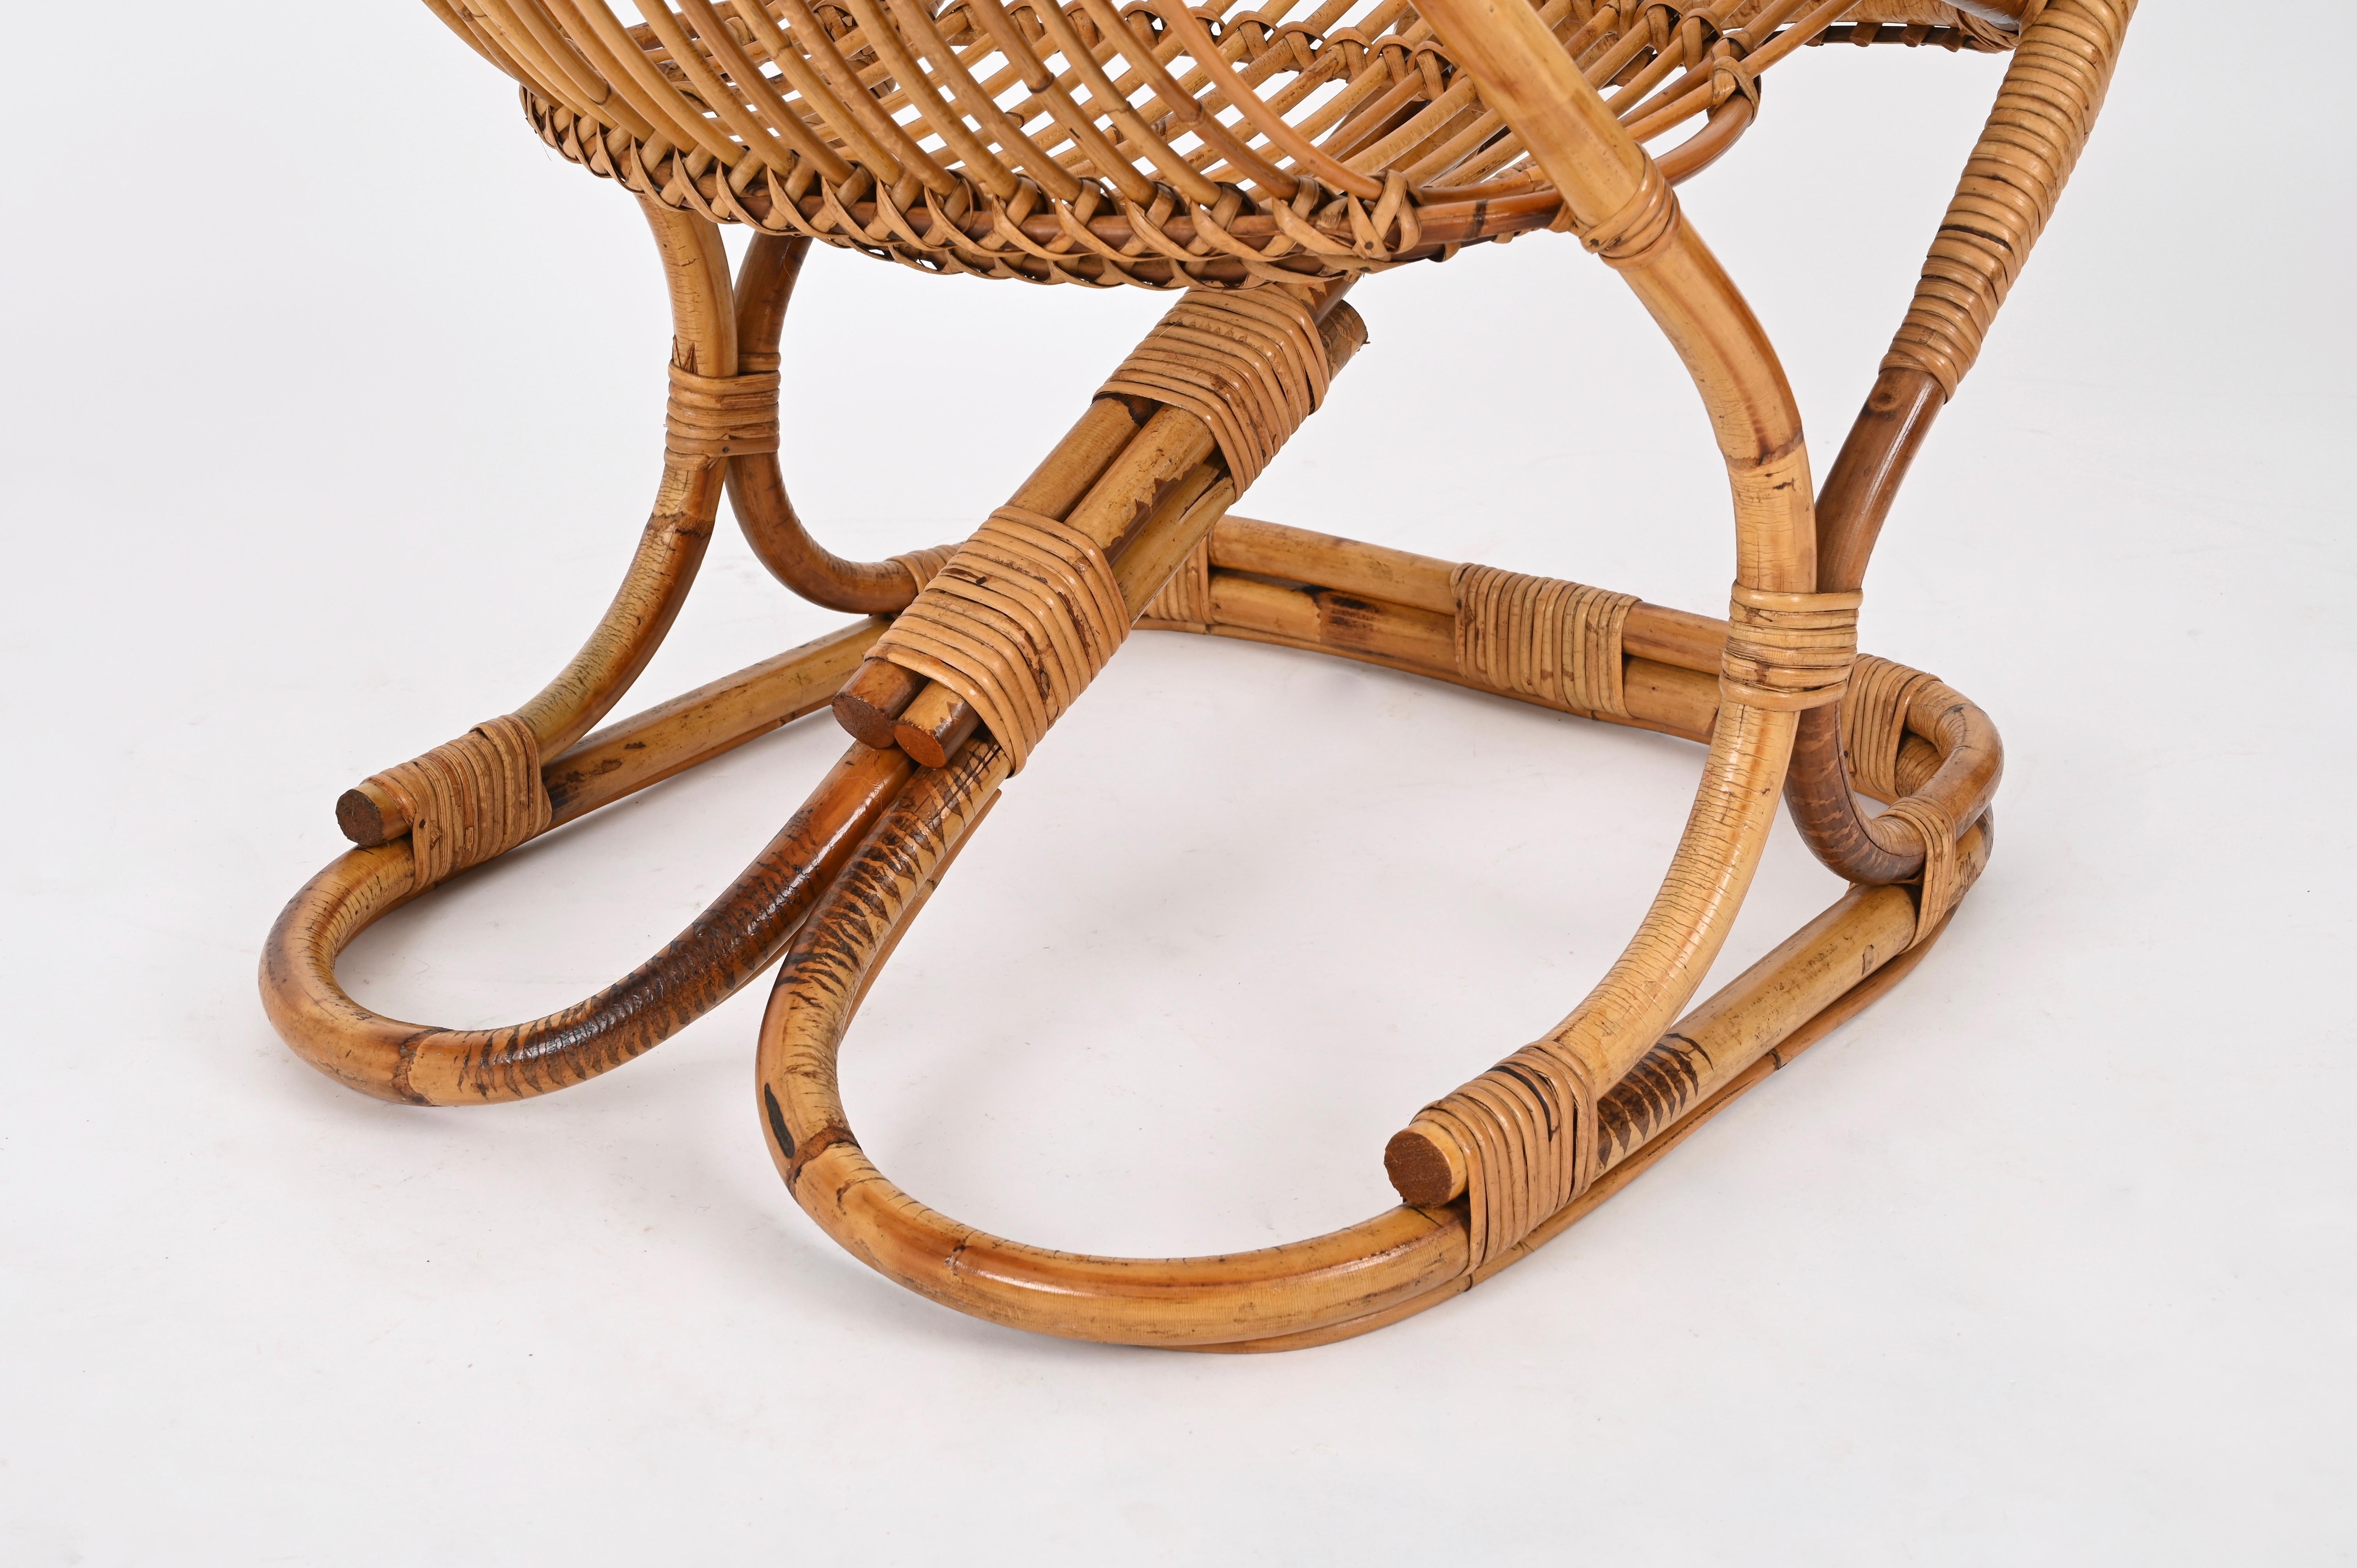 Pair of Midcentury Italian Wicker and Rattan Armchairs by Tito Agnoli, 1960s For Sale 1